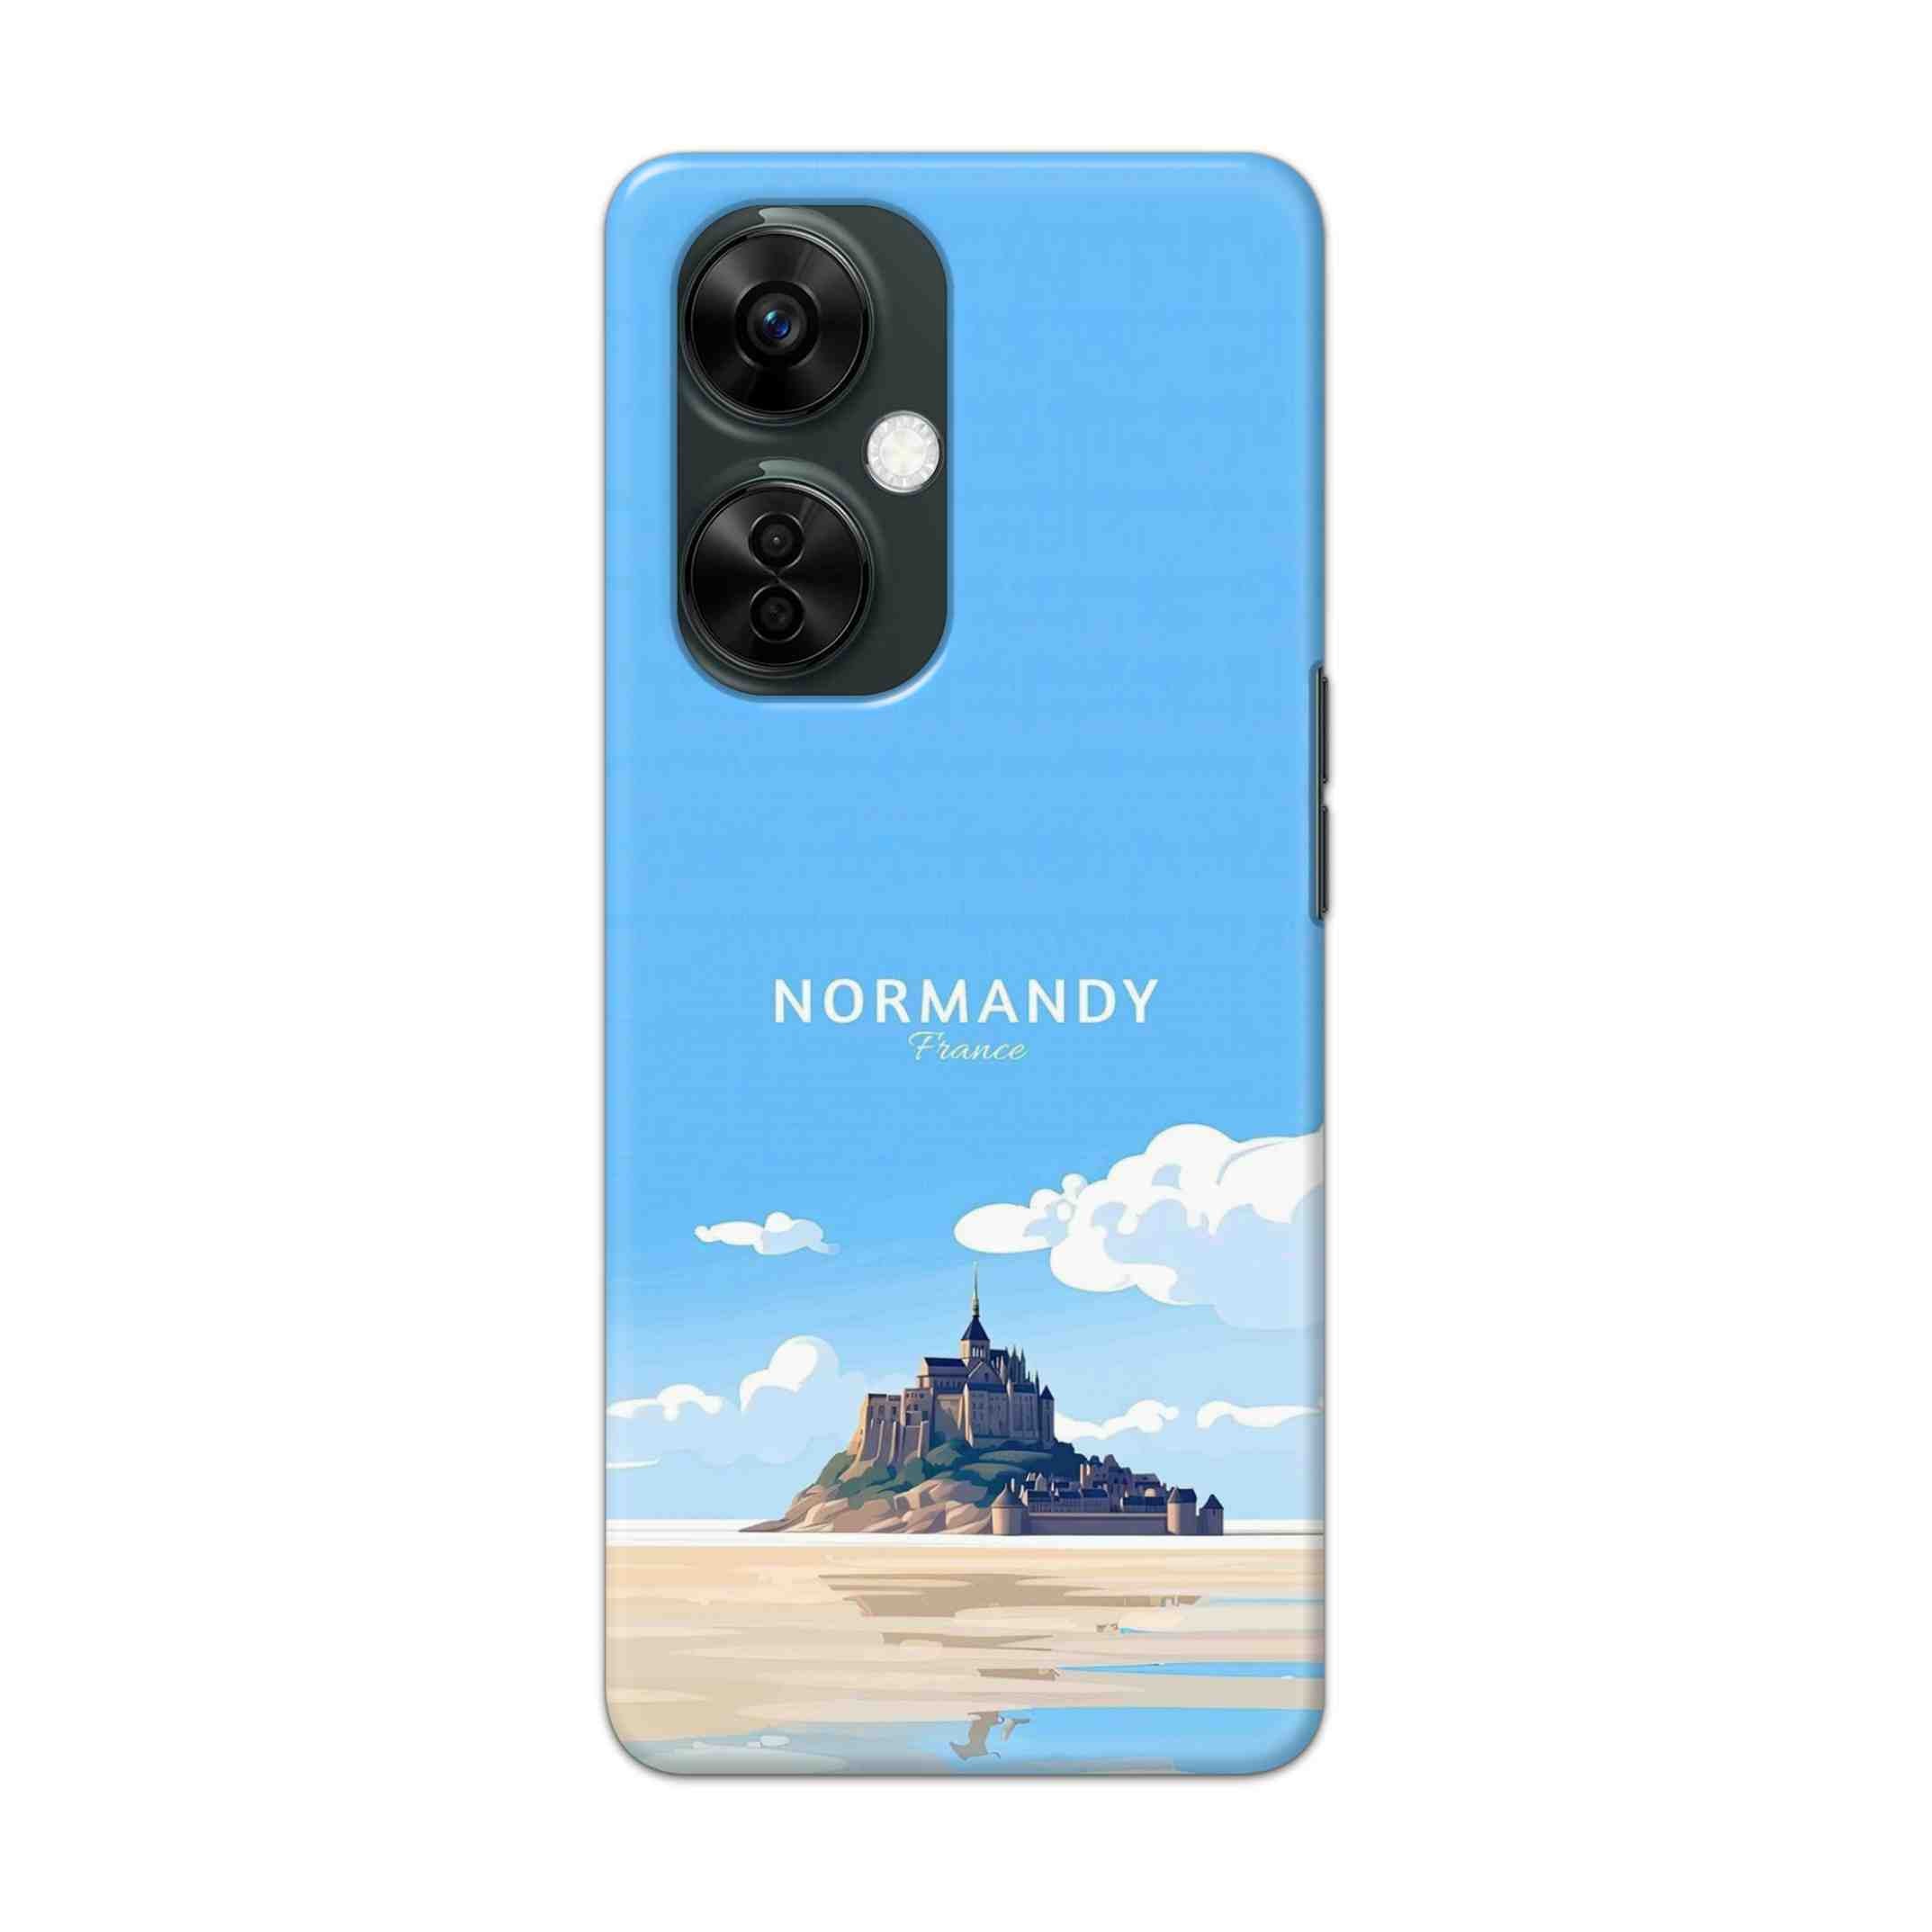 Buy Normandy Hard Back Mobile Phone Case Cover For Oneplus Nord CE 3 Lite Online